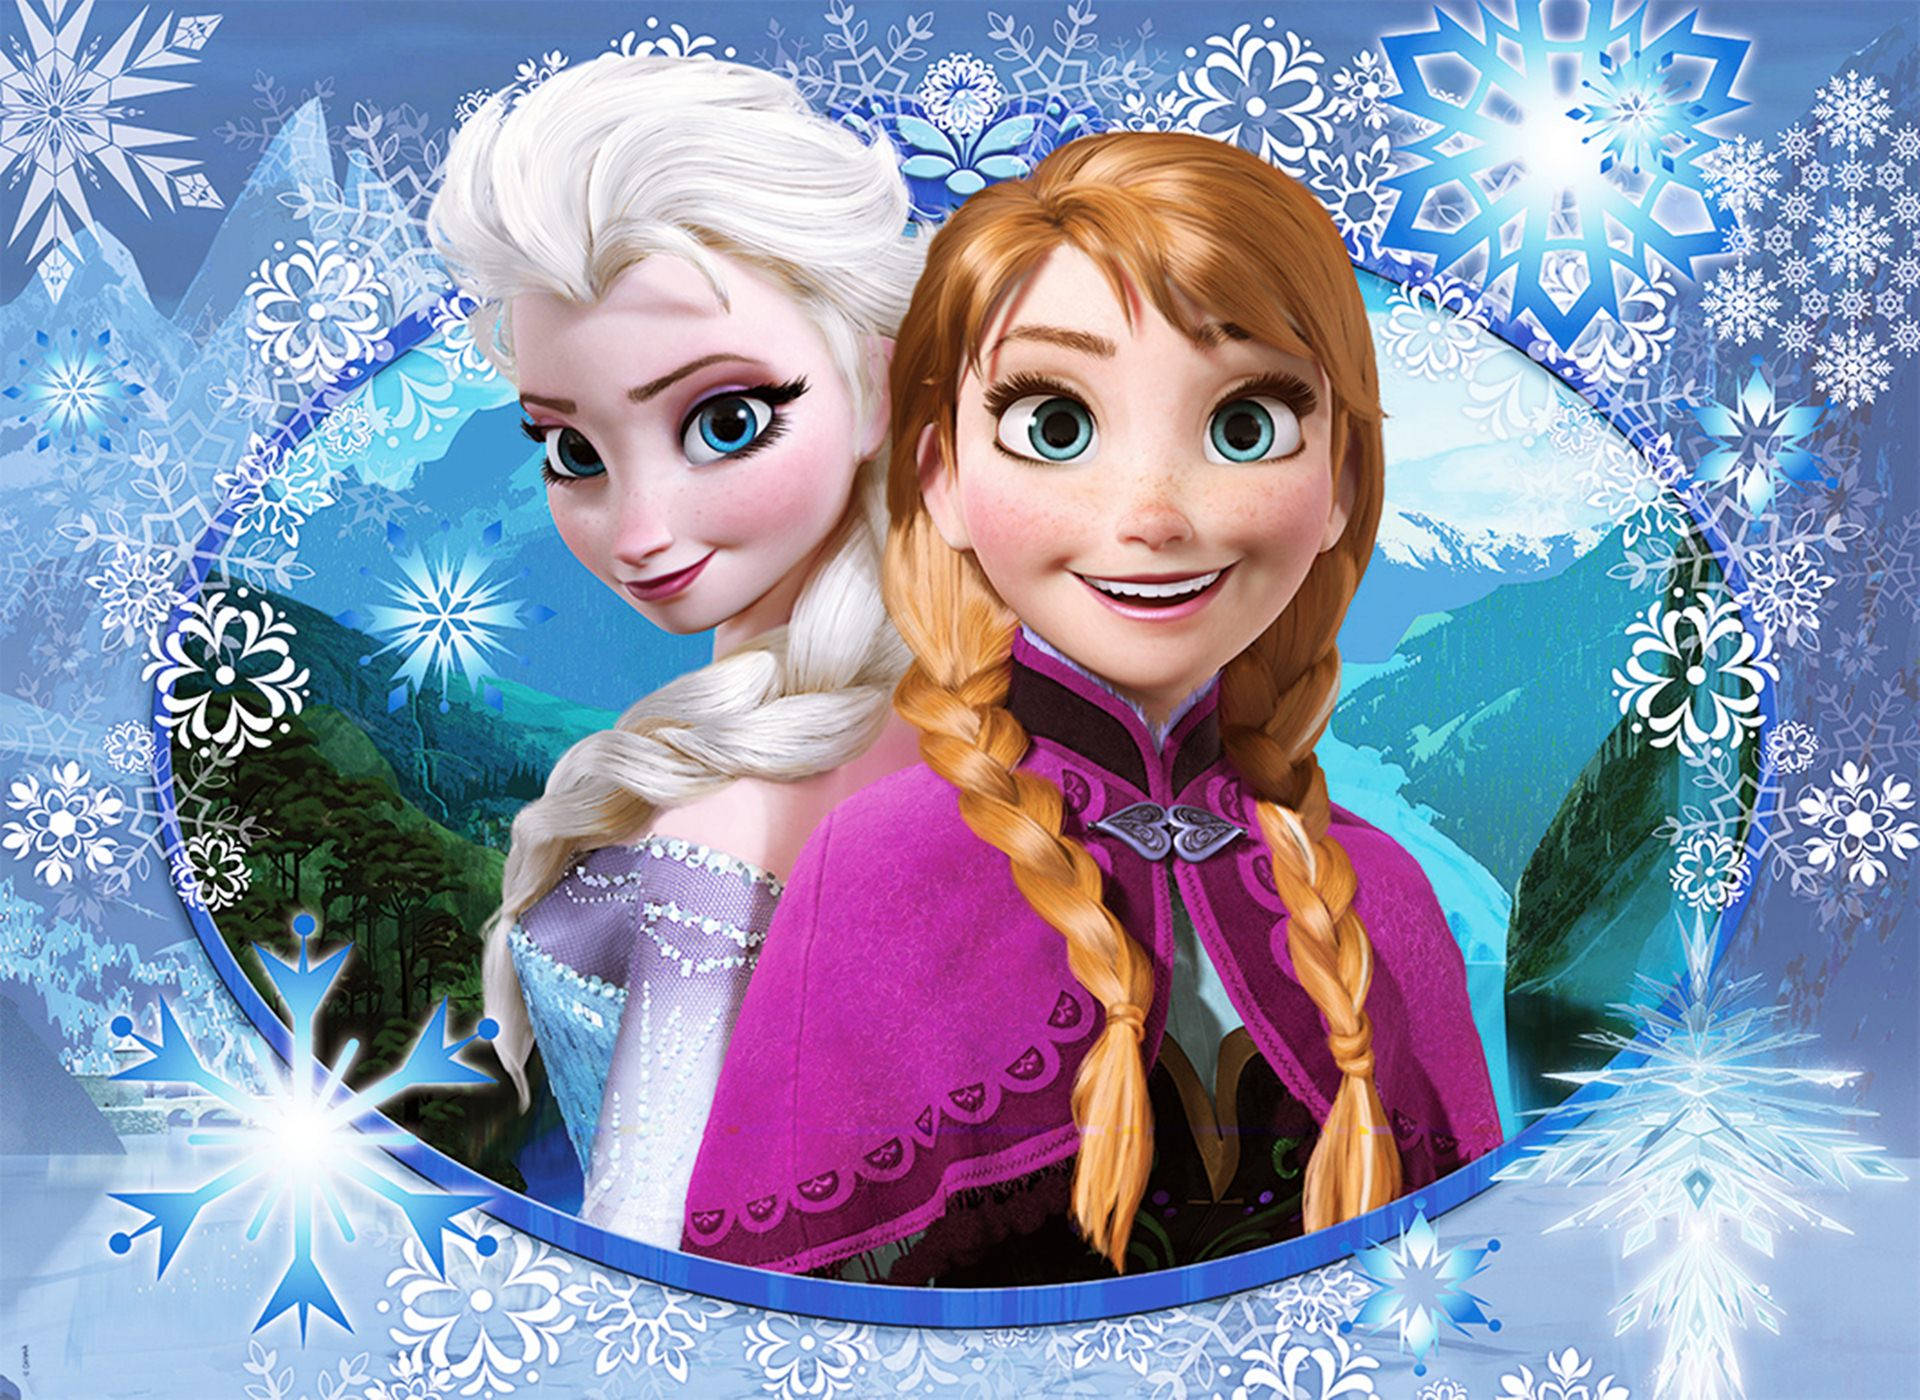 Elsa And Anna With Snowflakes Wallpaper